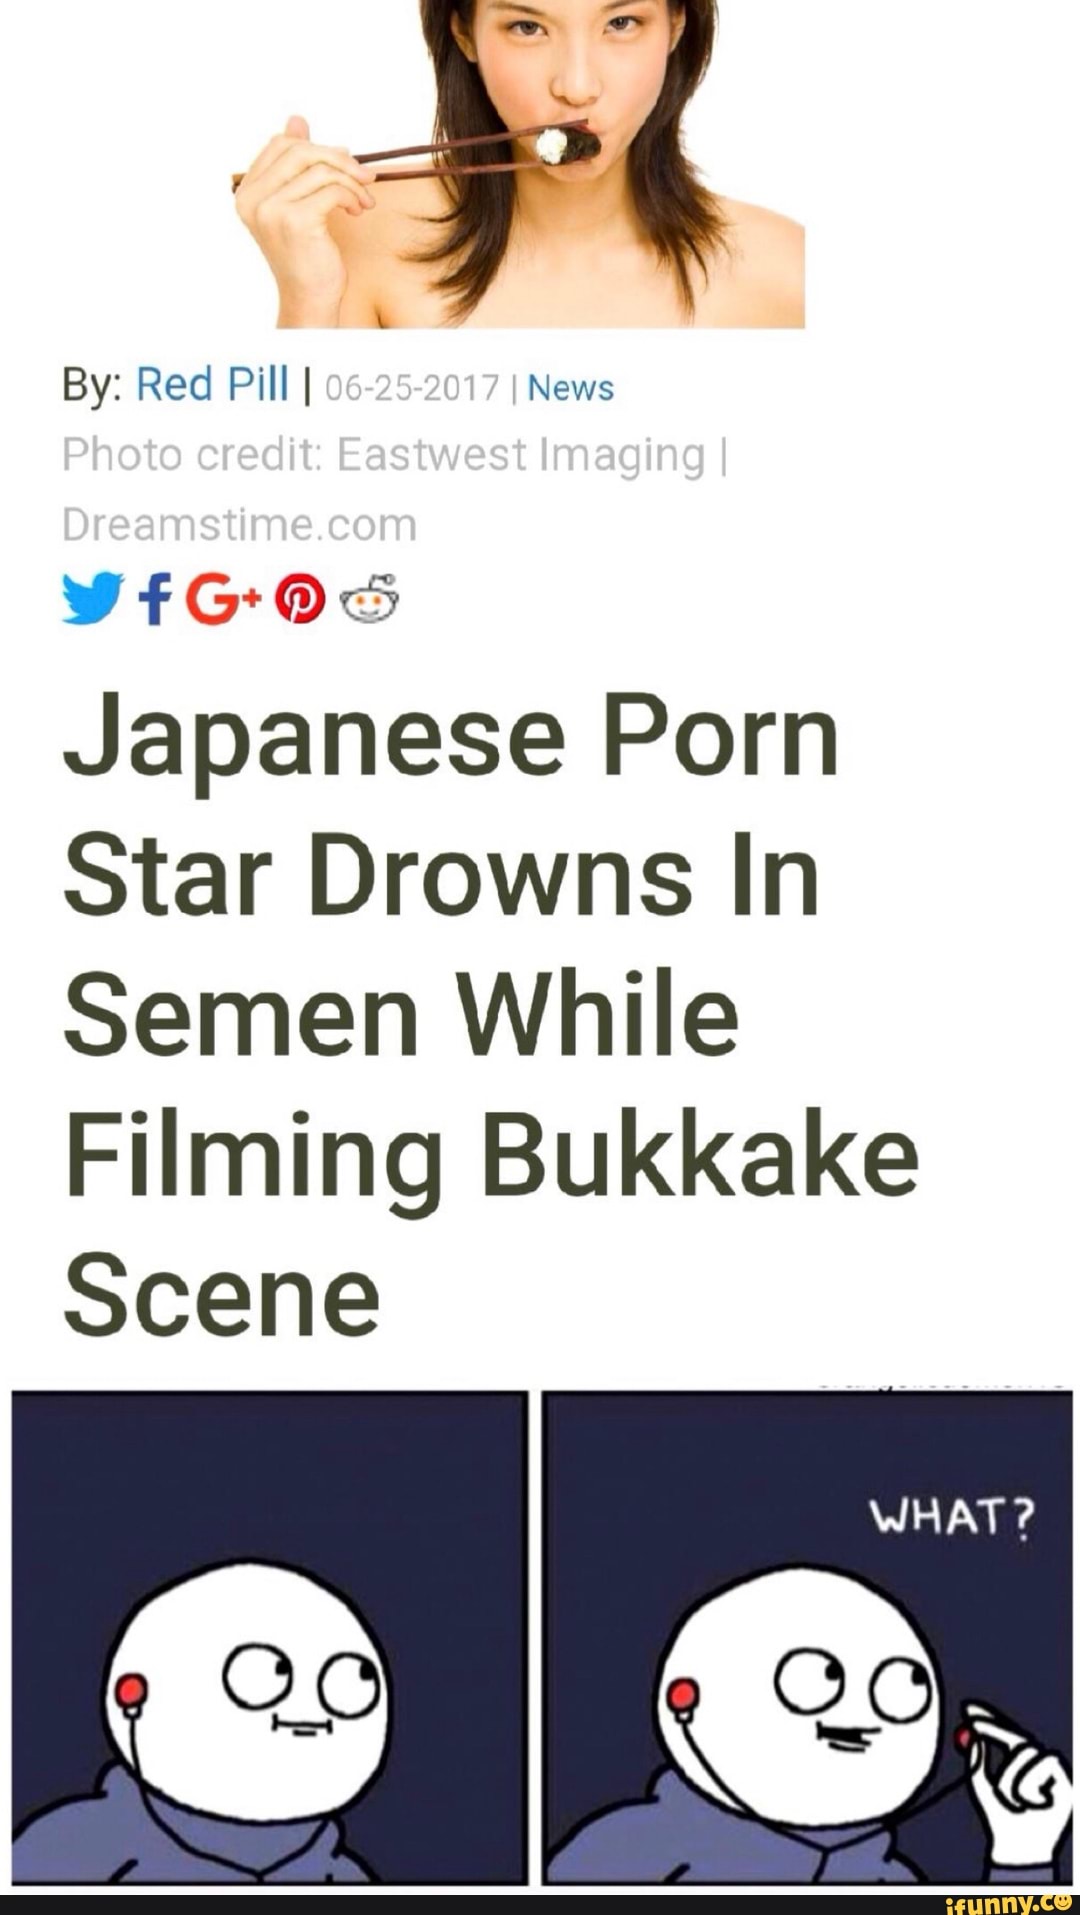 By Red Pill I News Japanes